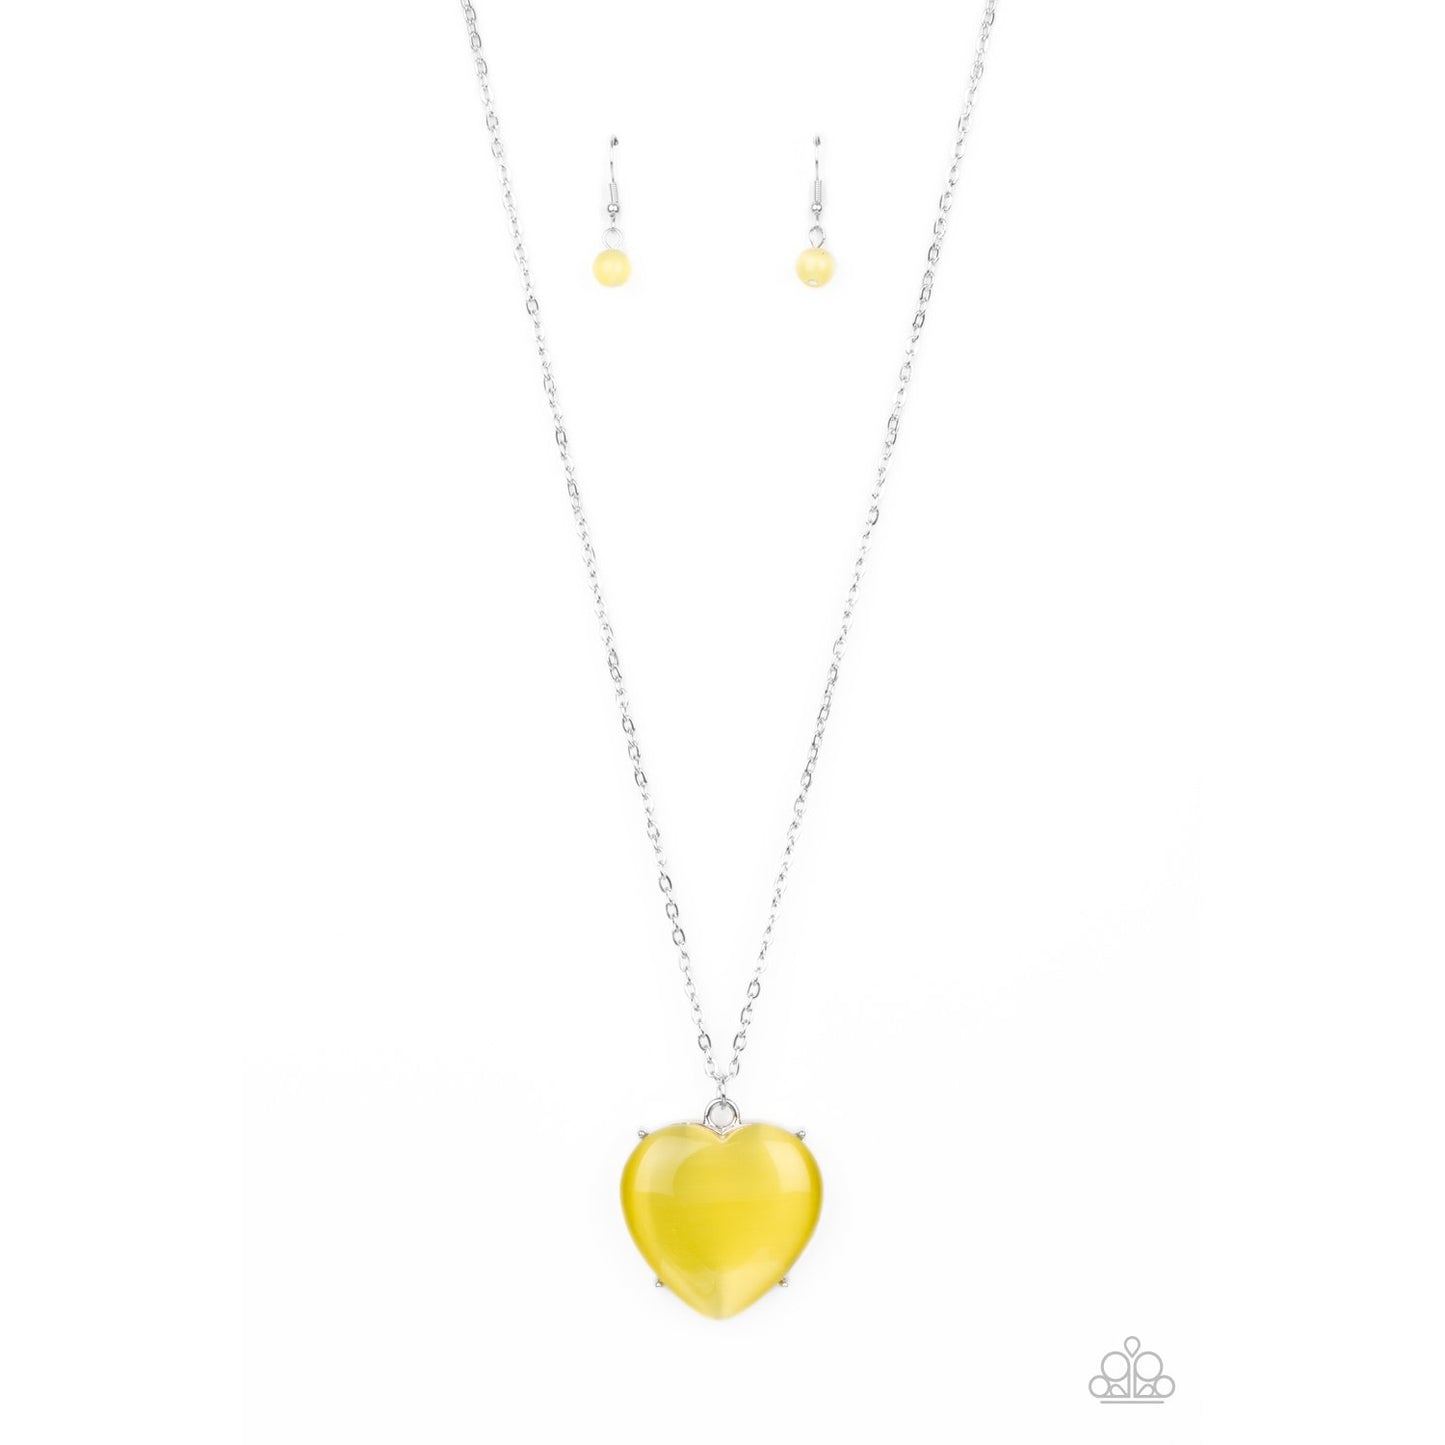 Warmhearted Glow - Yellow Cat's Eye Stone Necklace - Paparazzi Accessories - GlaMarous Titi Jewels